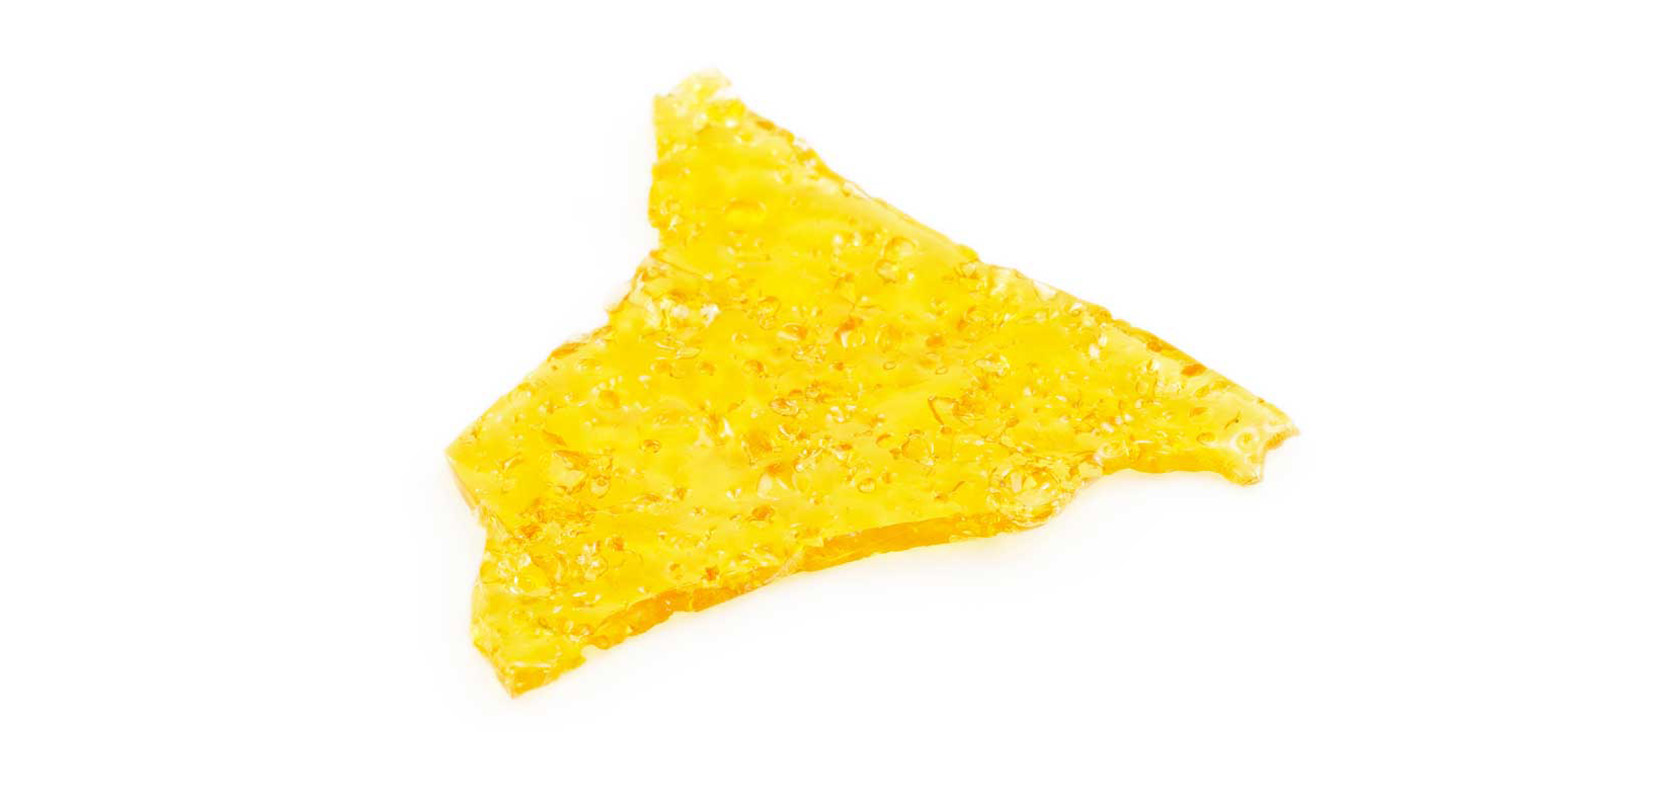 Rainbow Chip Premium Shatter for sale online in Canada.